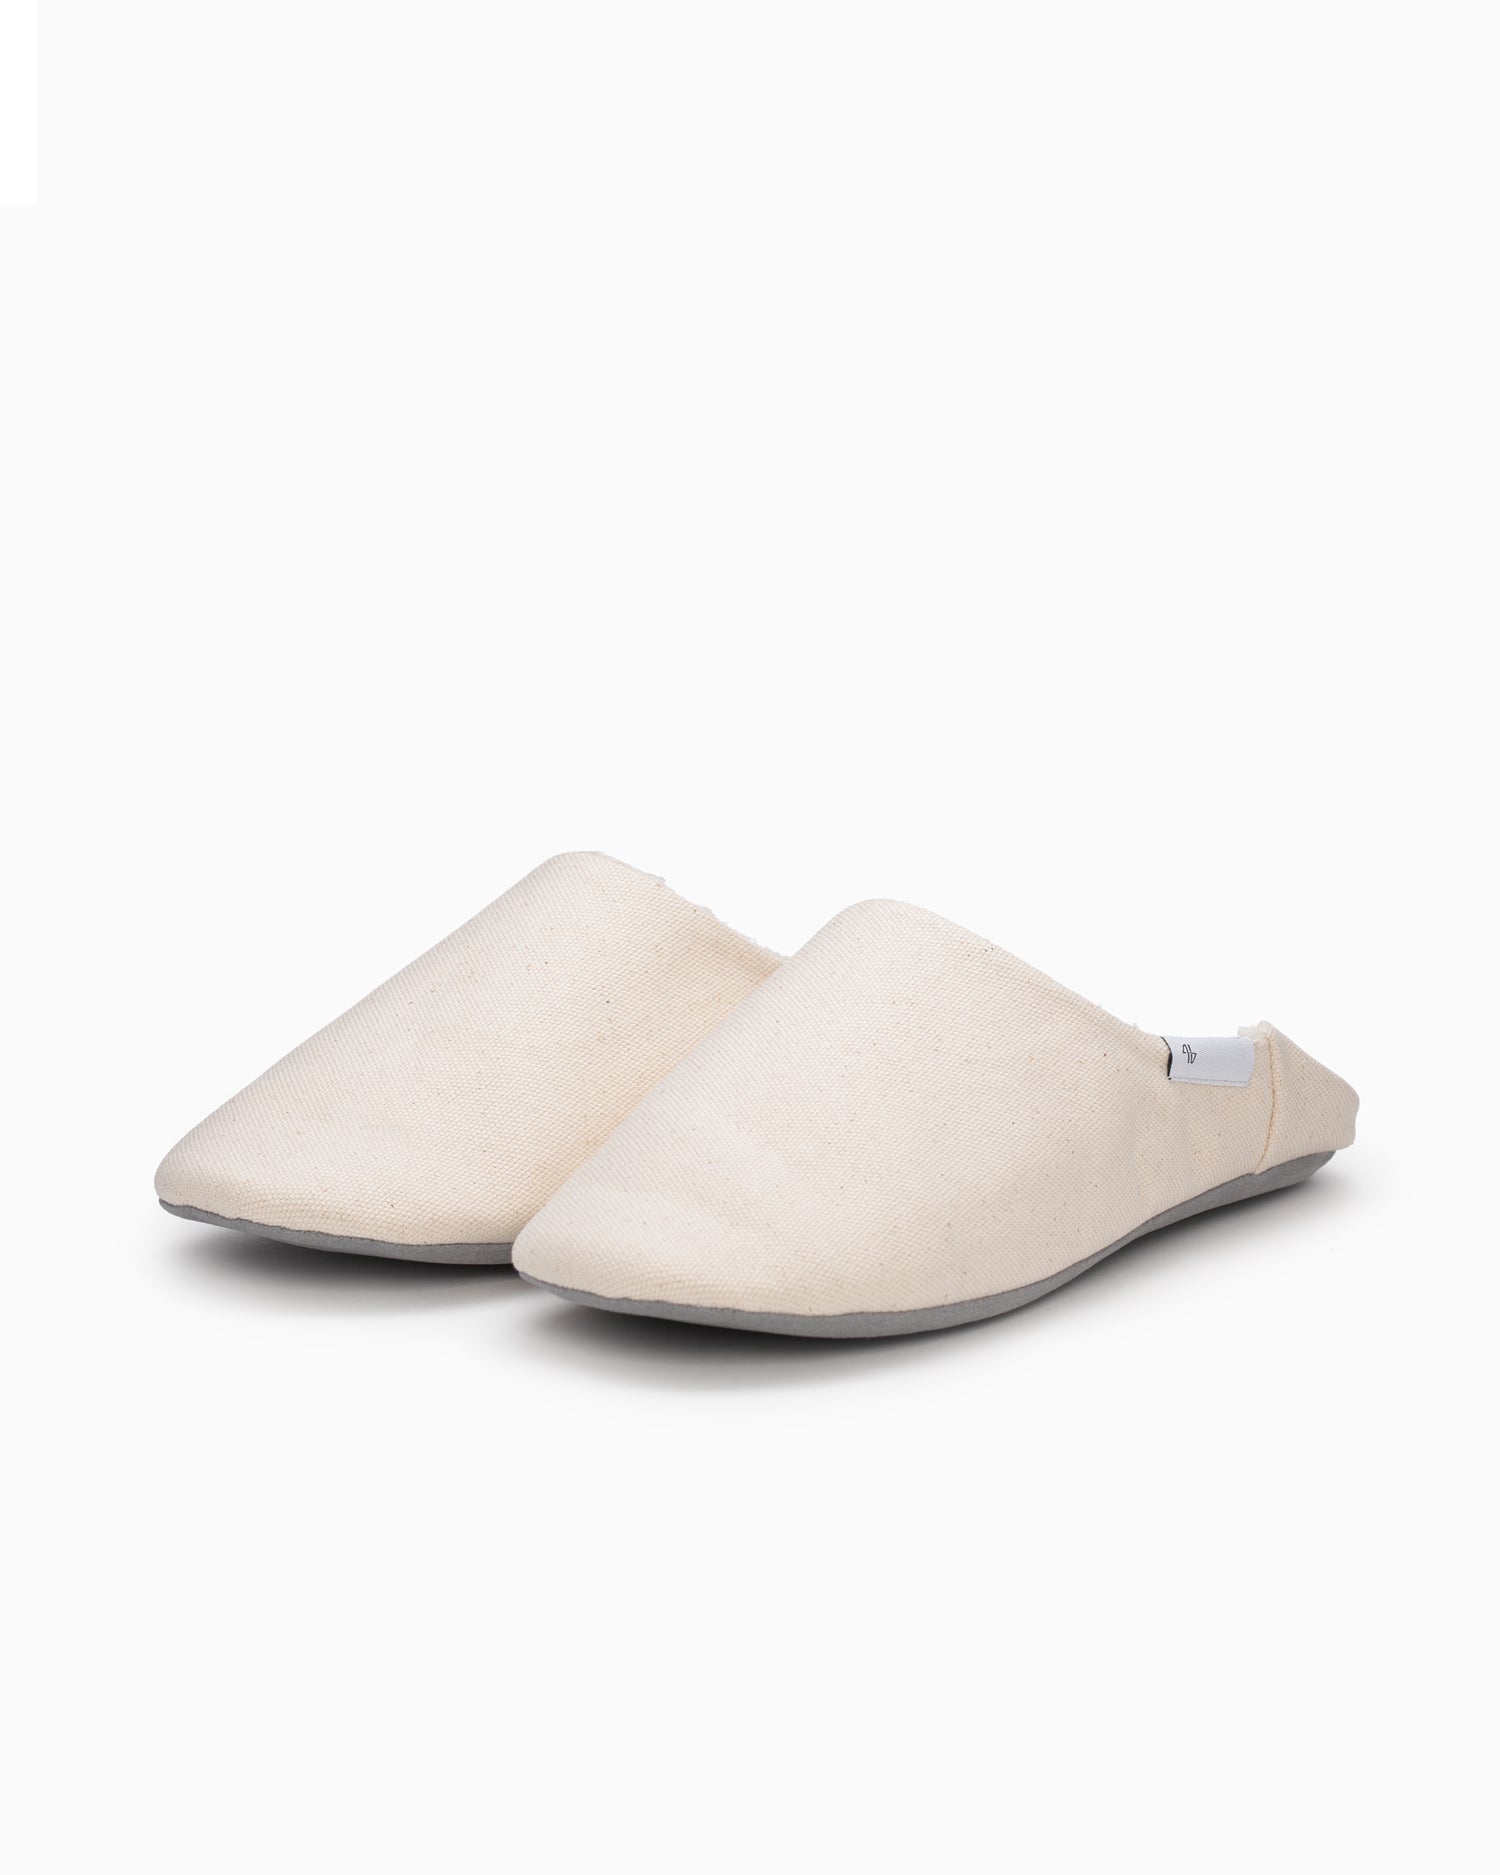 Wool Lined Canvas Room Shoes - Linen